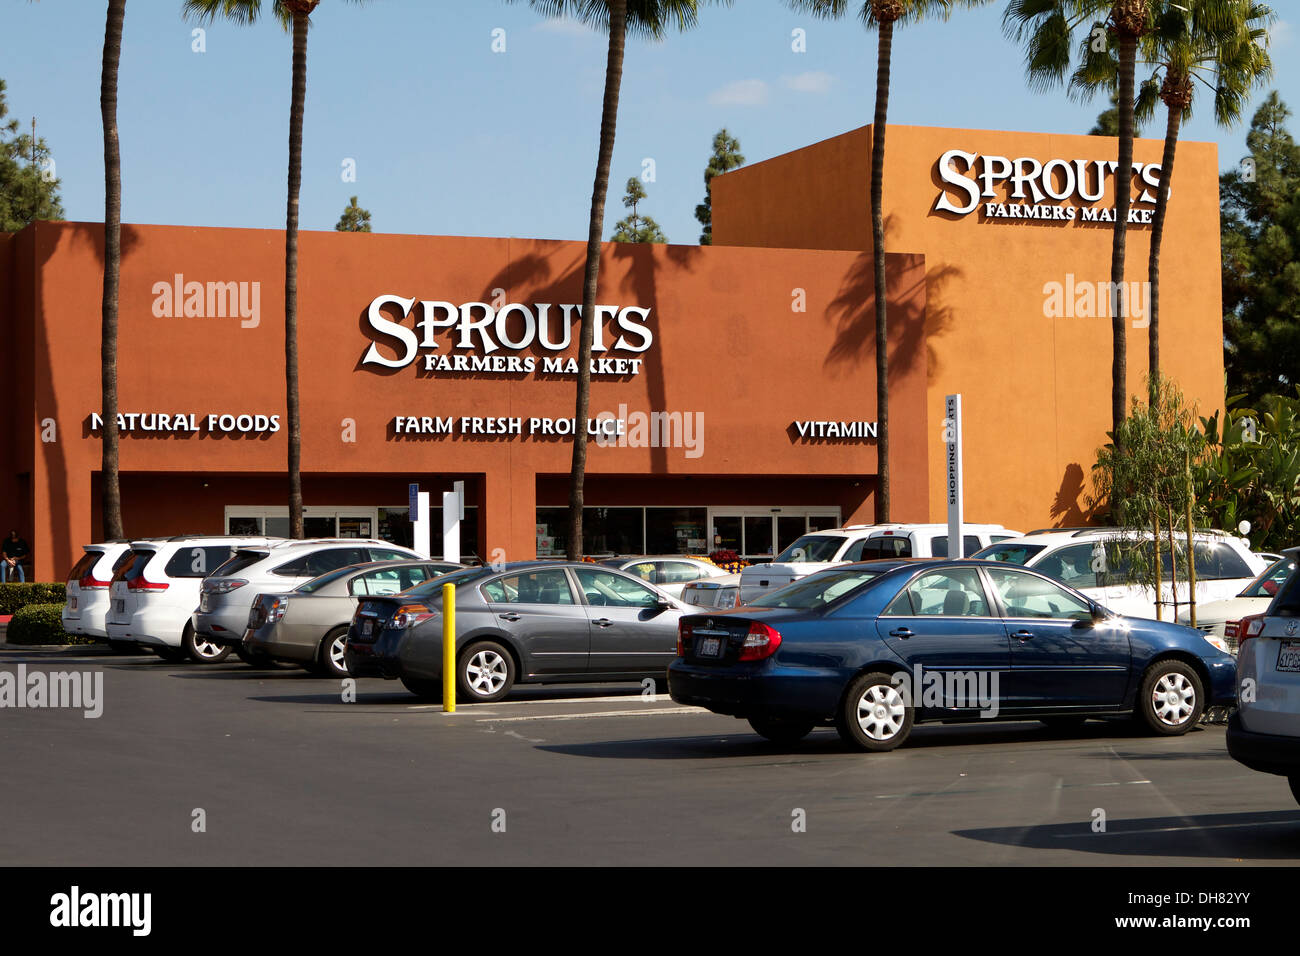 Sprouts neighborhood farmers market grocery store front and logo in Tustin California. A chain of specialty grocery stores Stock Photo